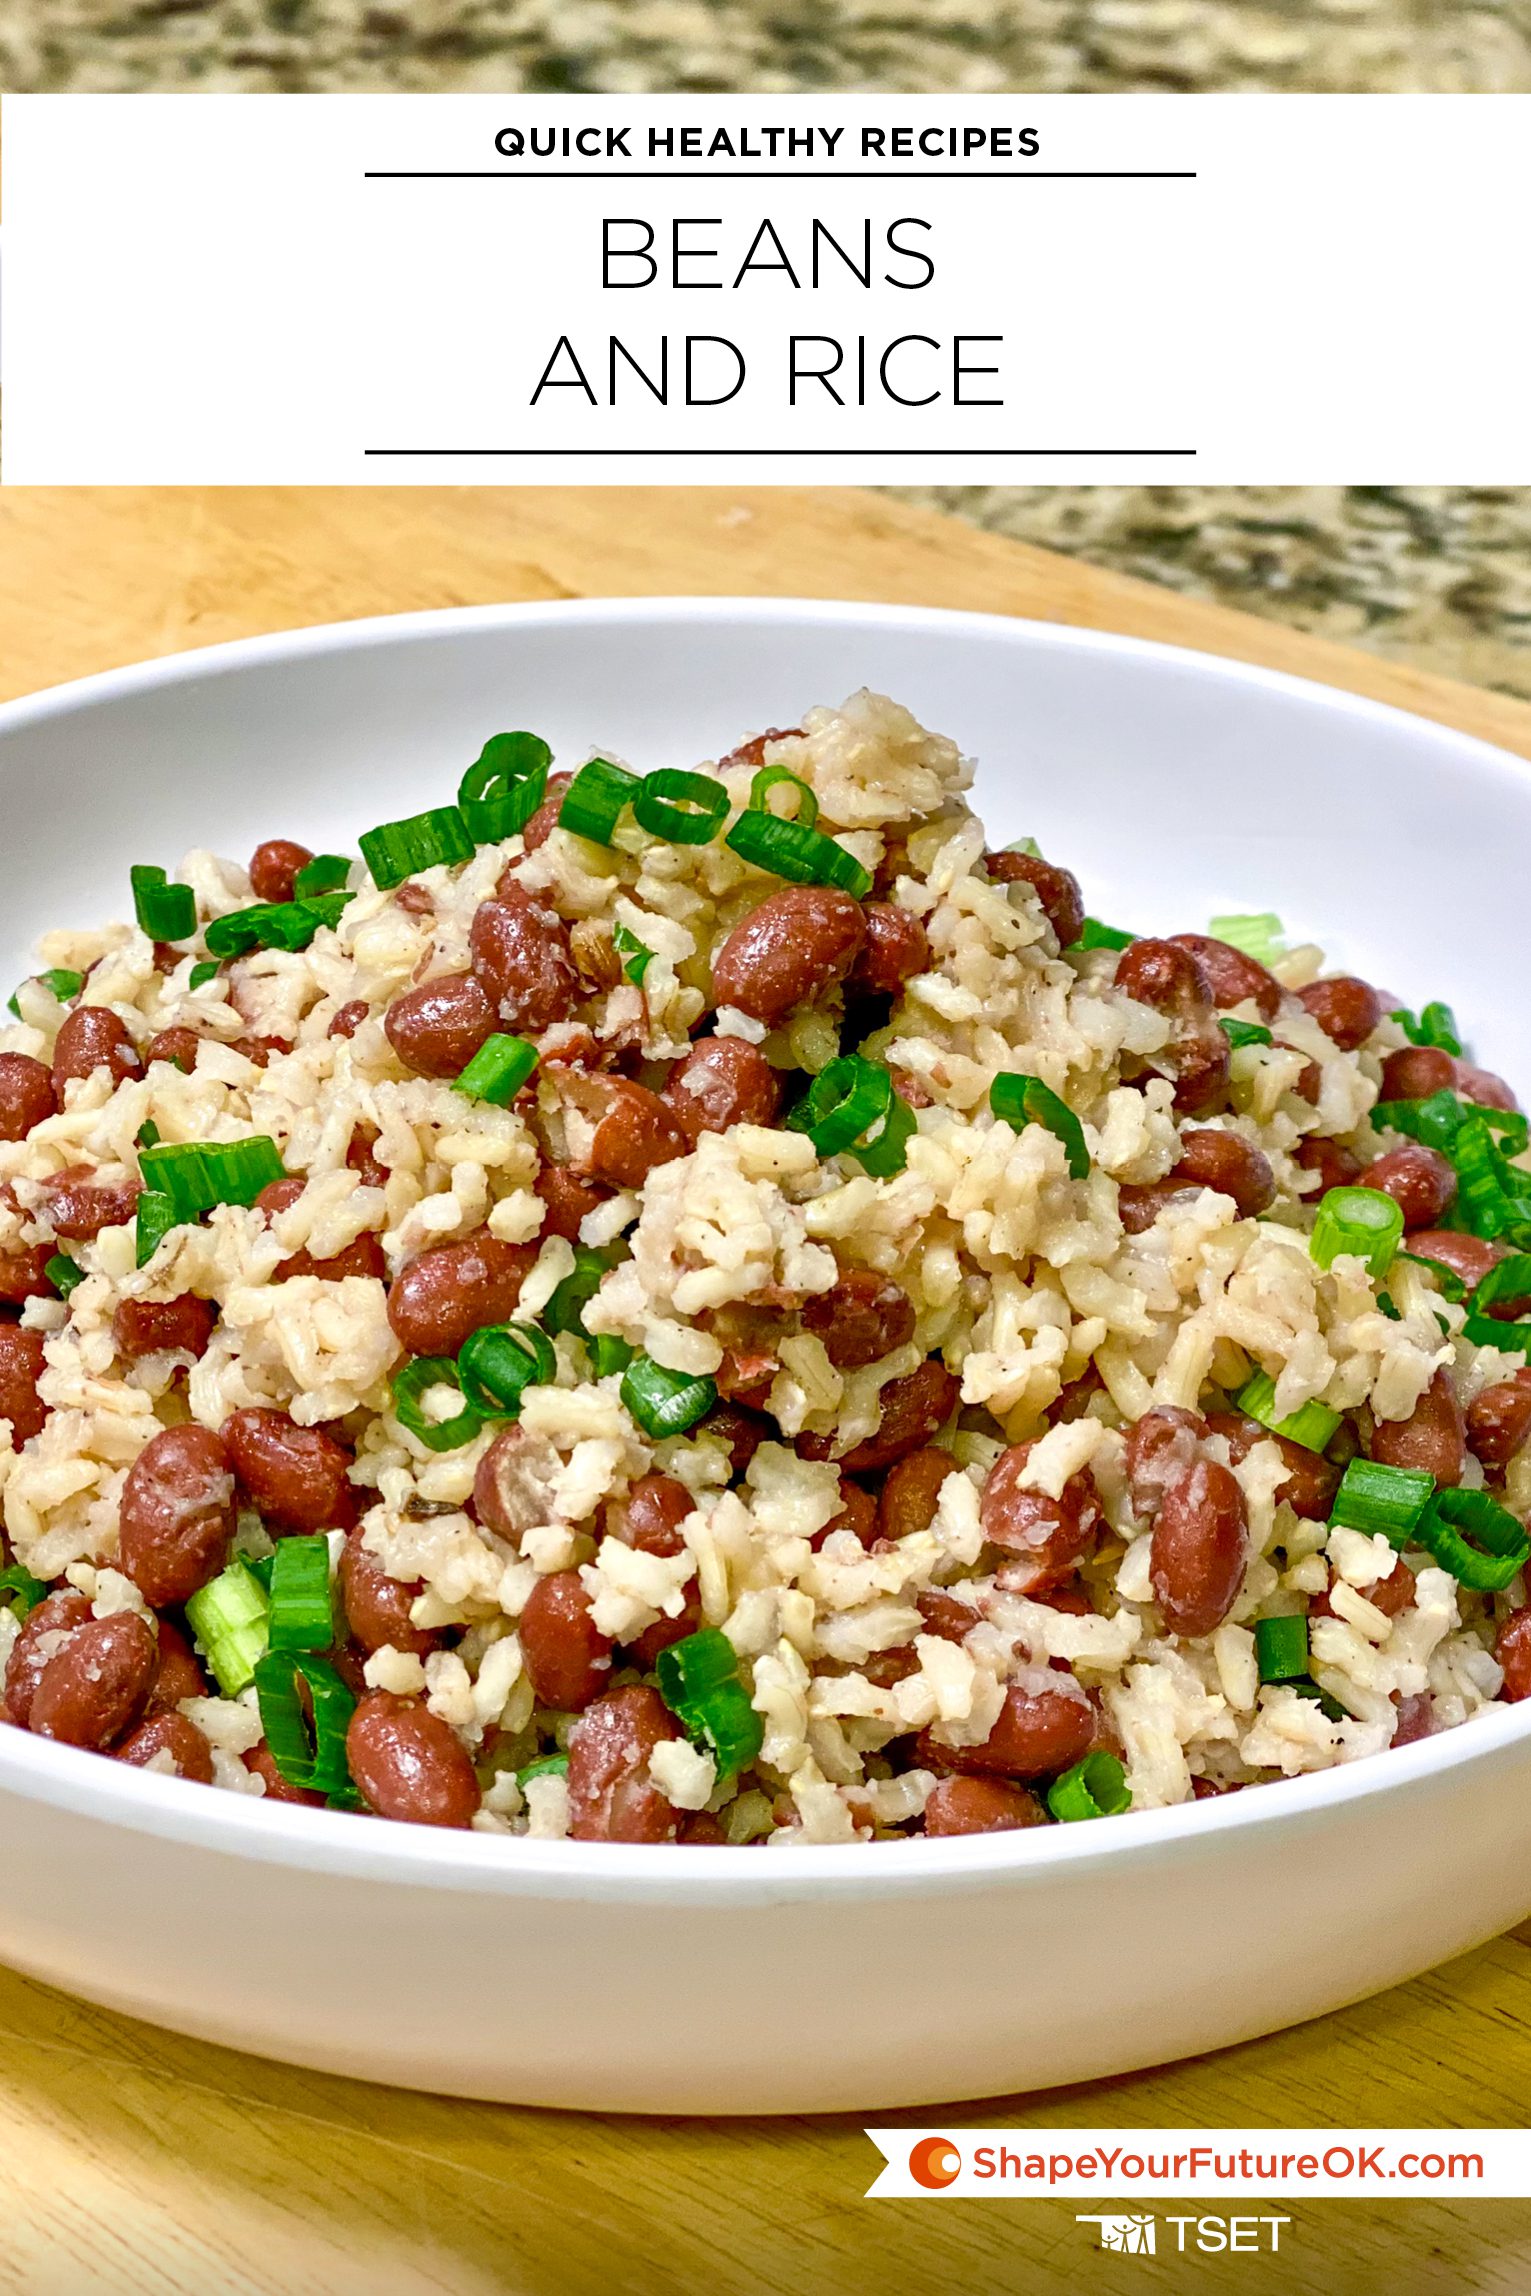 Beans and rice recipe